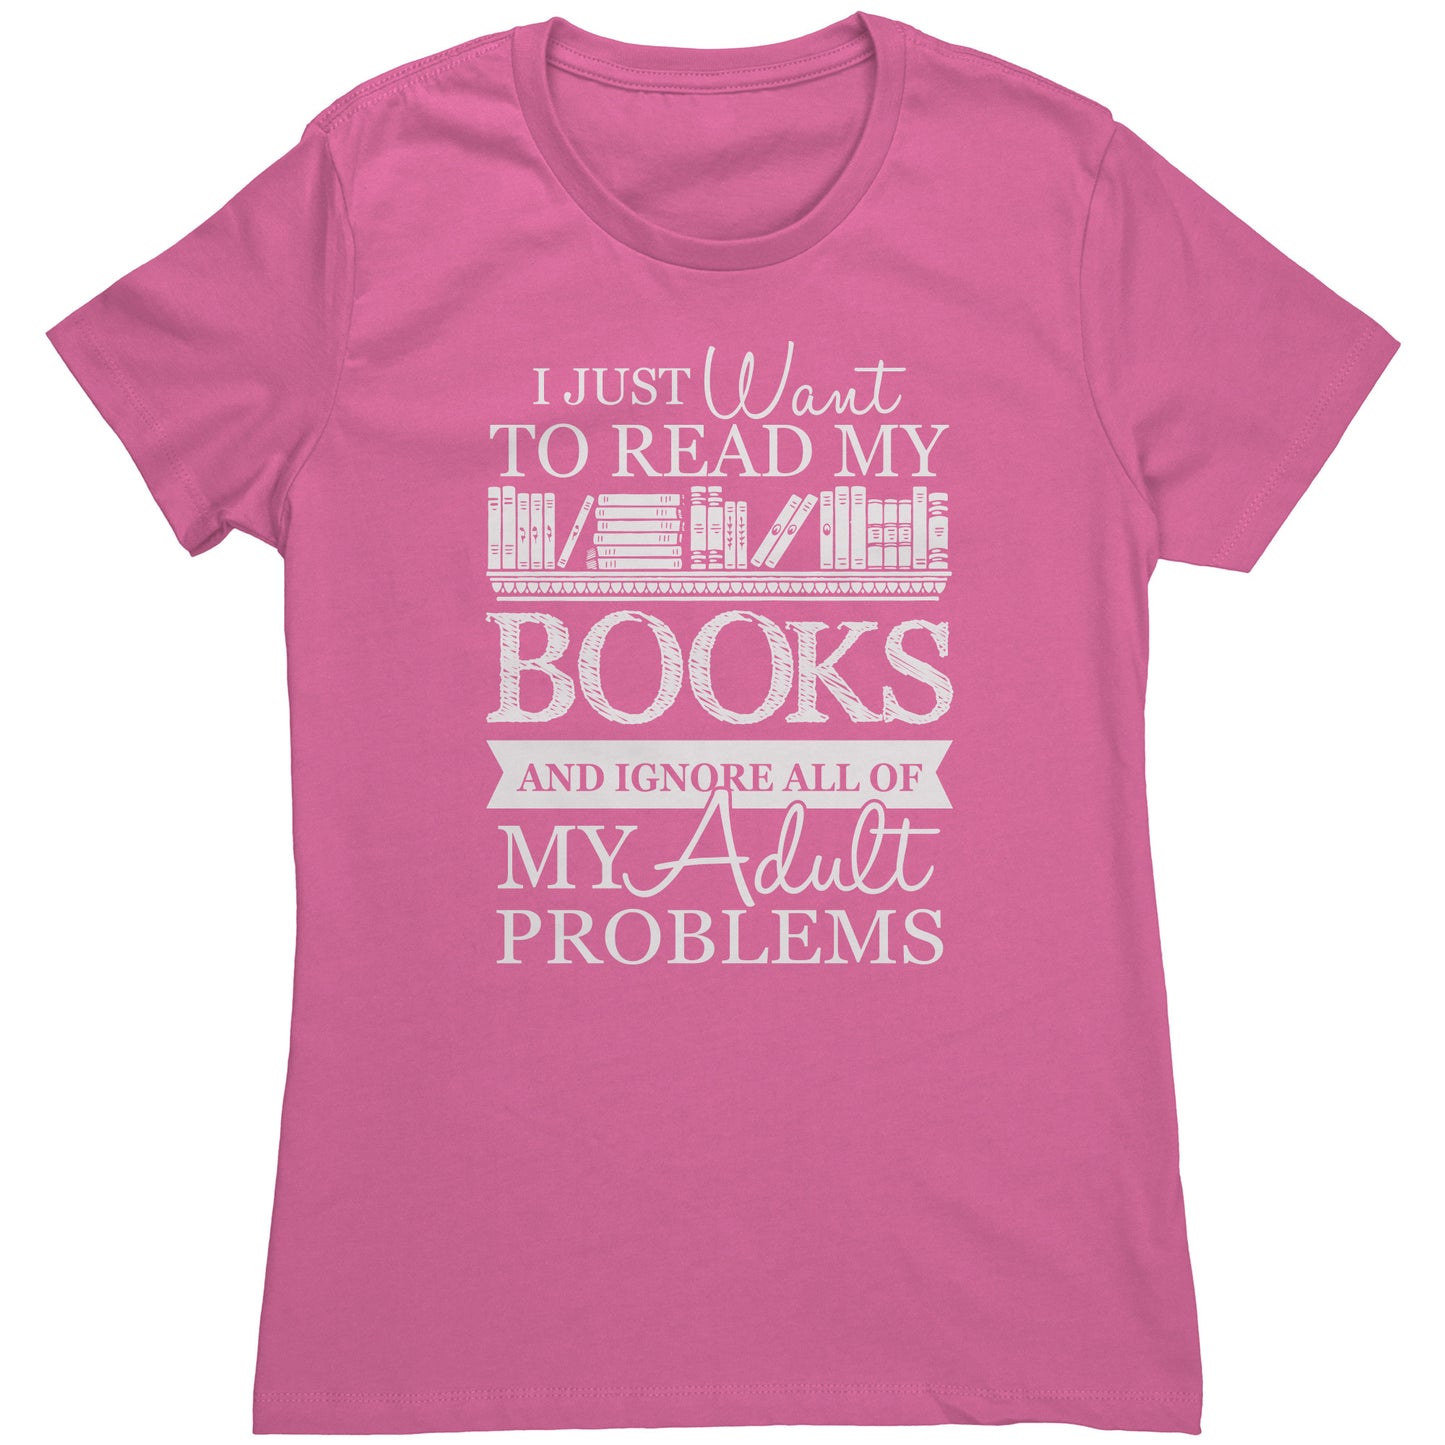 I Just Want To Read My Books And Ignore All Of My Adult Problems | Women's T-Shirt